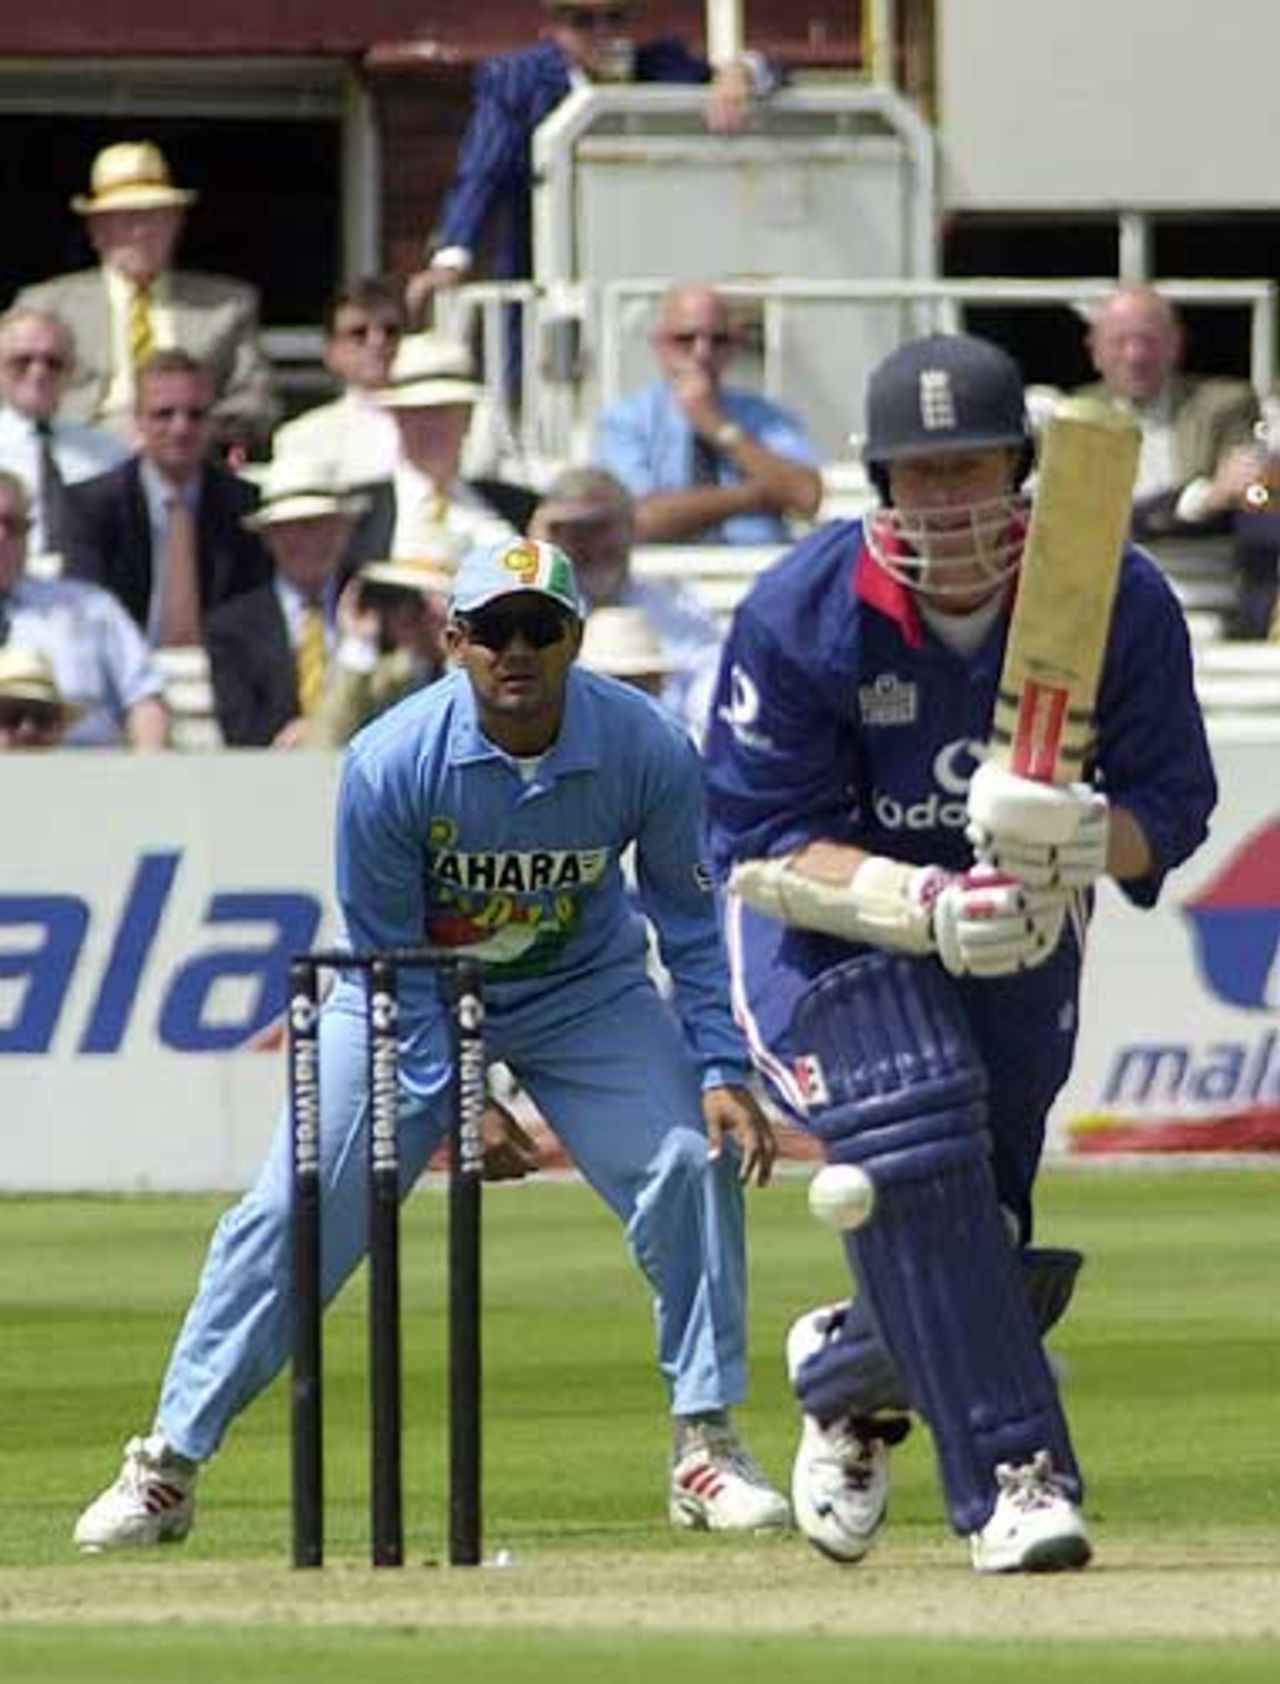 Nick Knight pushes to the off in the England innings, England v India at Lord's, June 2002